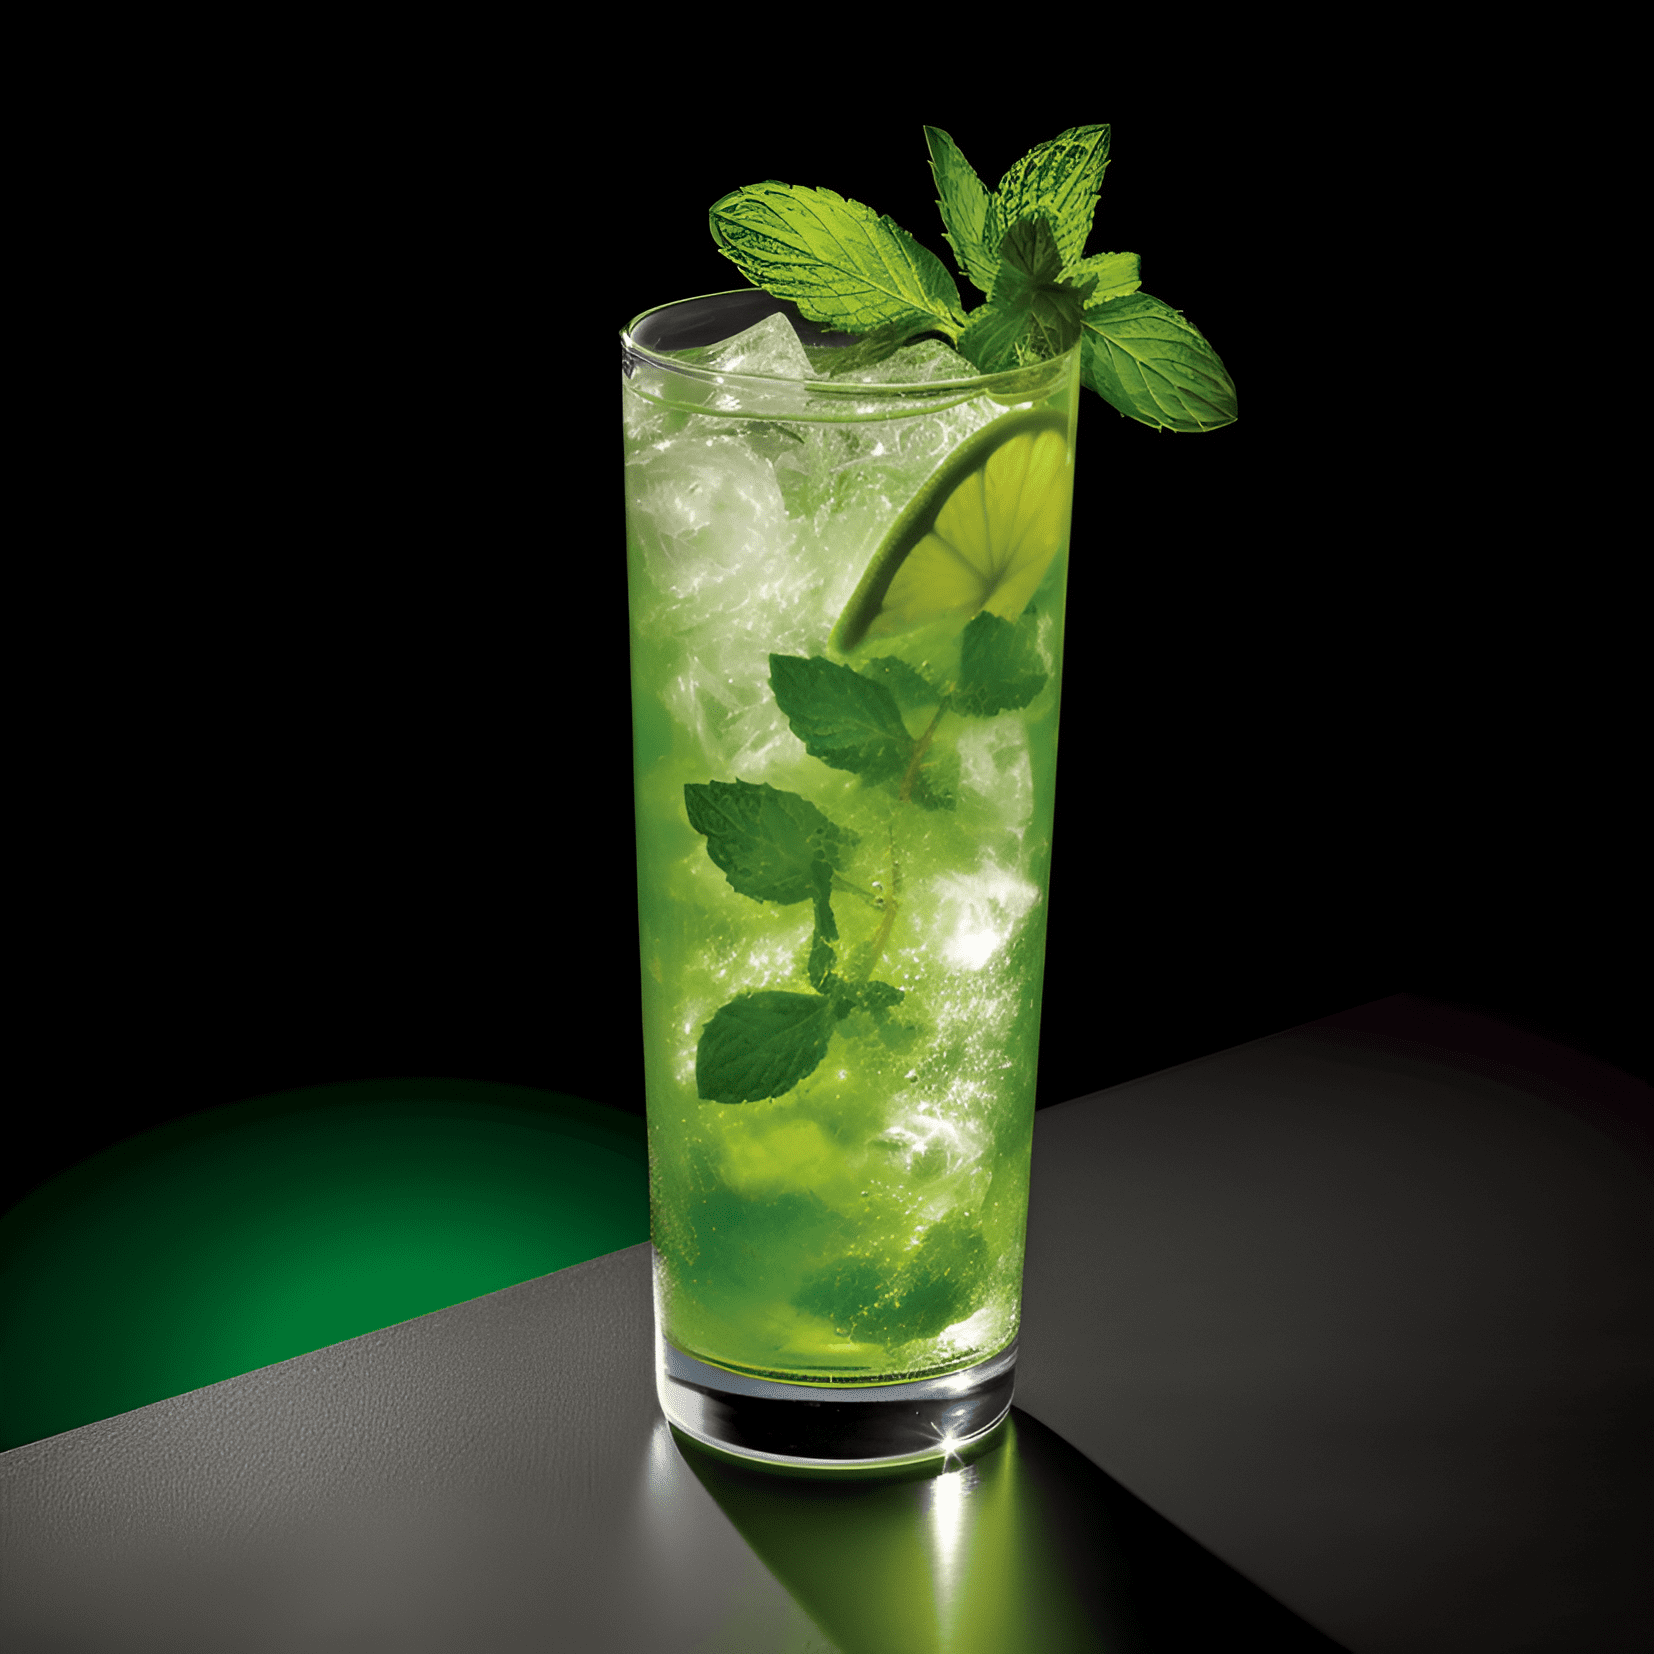 Mojito Diablo Cocktail Recipe - The Mojito Diablo is a refreshing, sweet, and spicy cocktail. The combination of mint, lime, and sugar provides a cool and sweet base, while the jalapeño peppers add a fiery kick. The rum adds a smooth and warming sensation, making this cocktail a well-balanced and exciting experience.